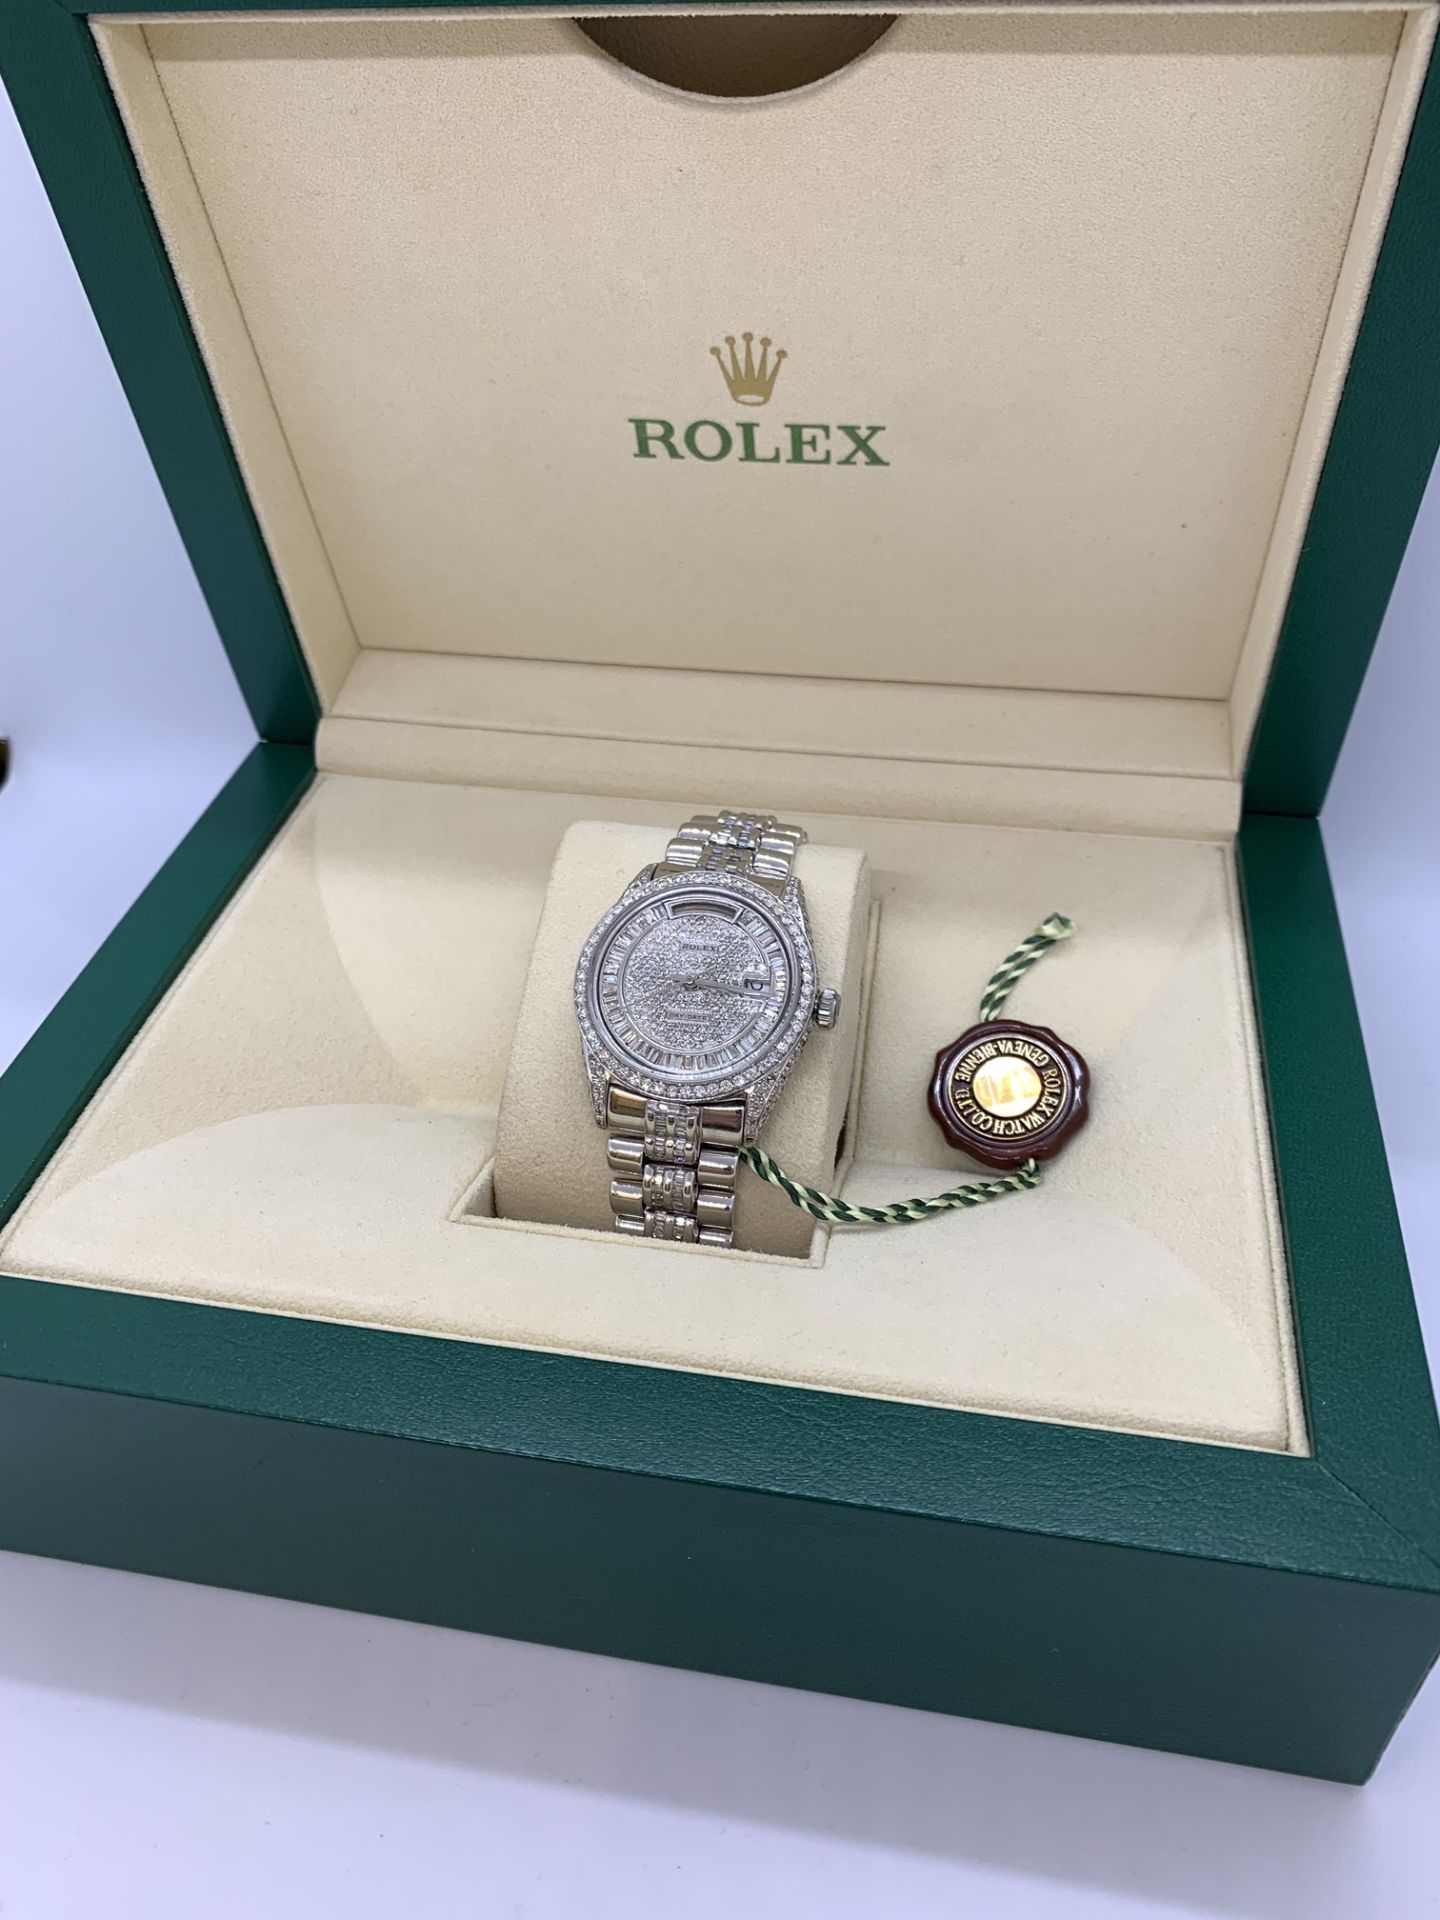 36mm DIAMOND SET DAY-DATE WATCH MARKED ROLEX SET IN WHITE METAL (TESTED AS GOLD) - Image 11 of 15